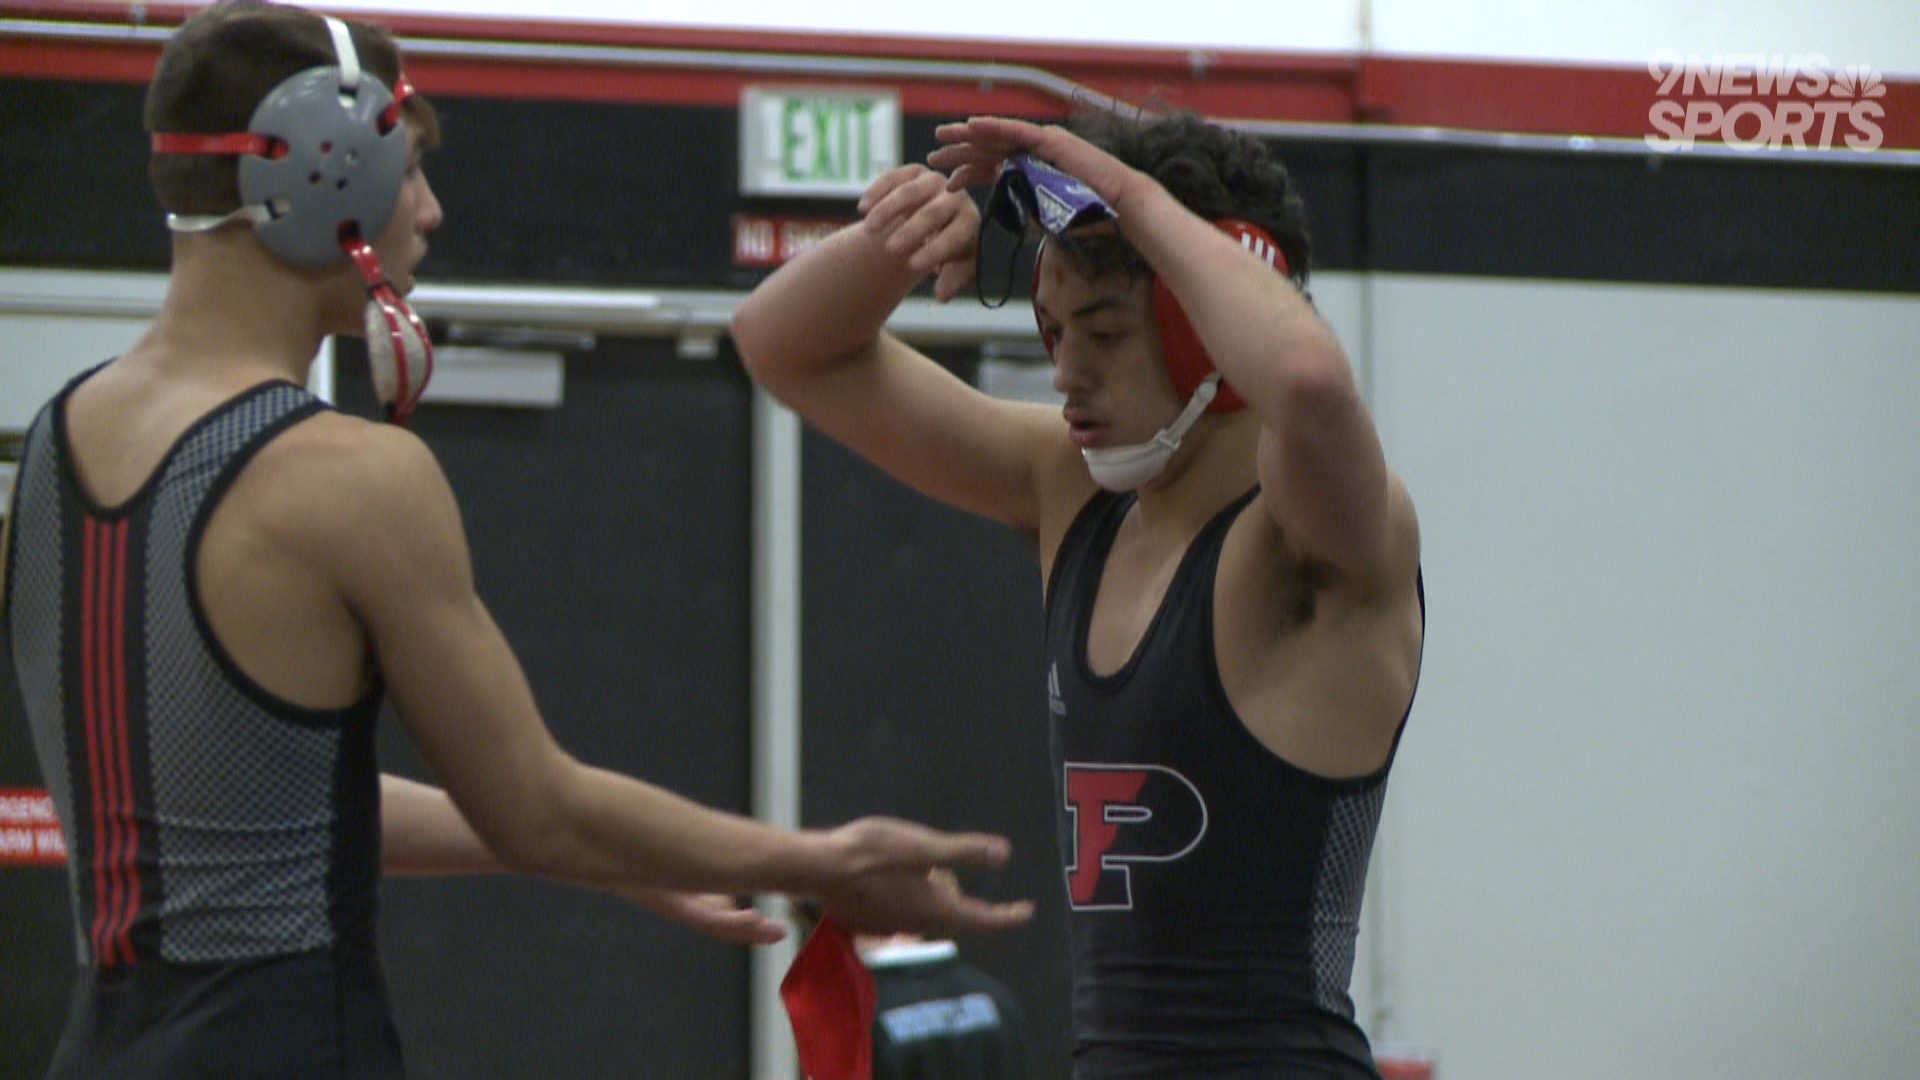 The Panthers boasted regional champions in all seven weight classes that wrestled Friday.